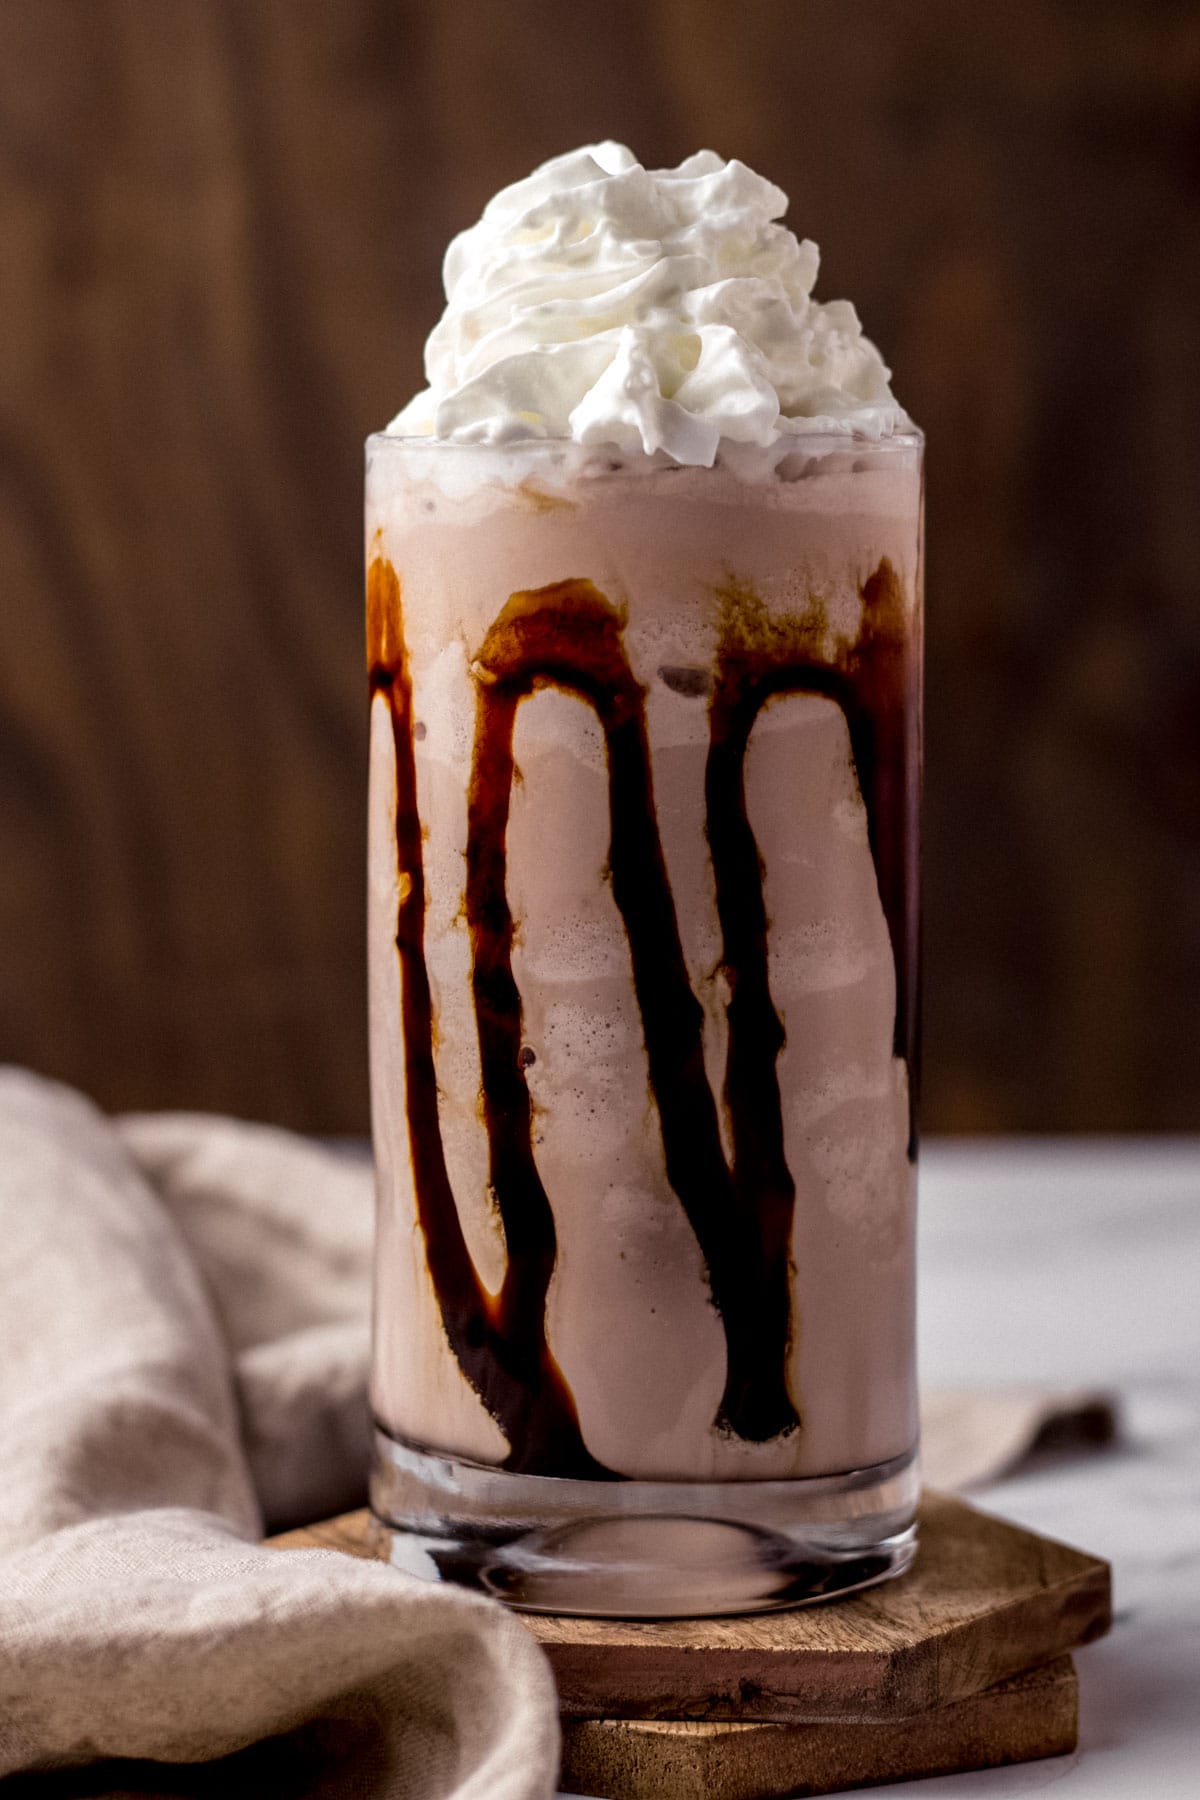 TGI Fridays Mudslide finished milkshake in glass with chocolate syrup in glass and whipped cream on top